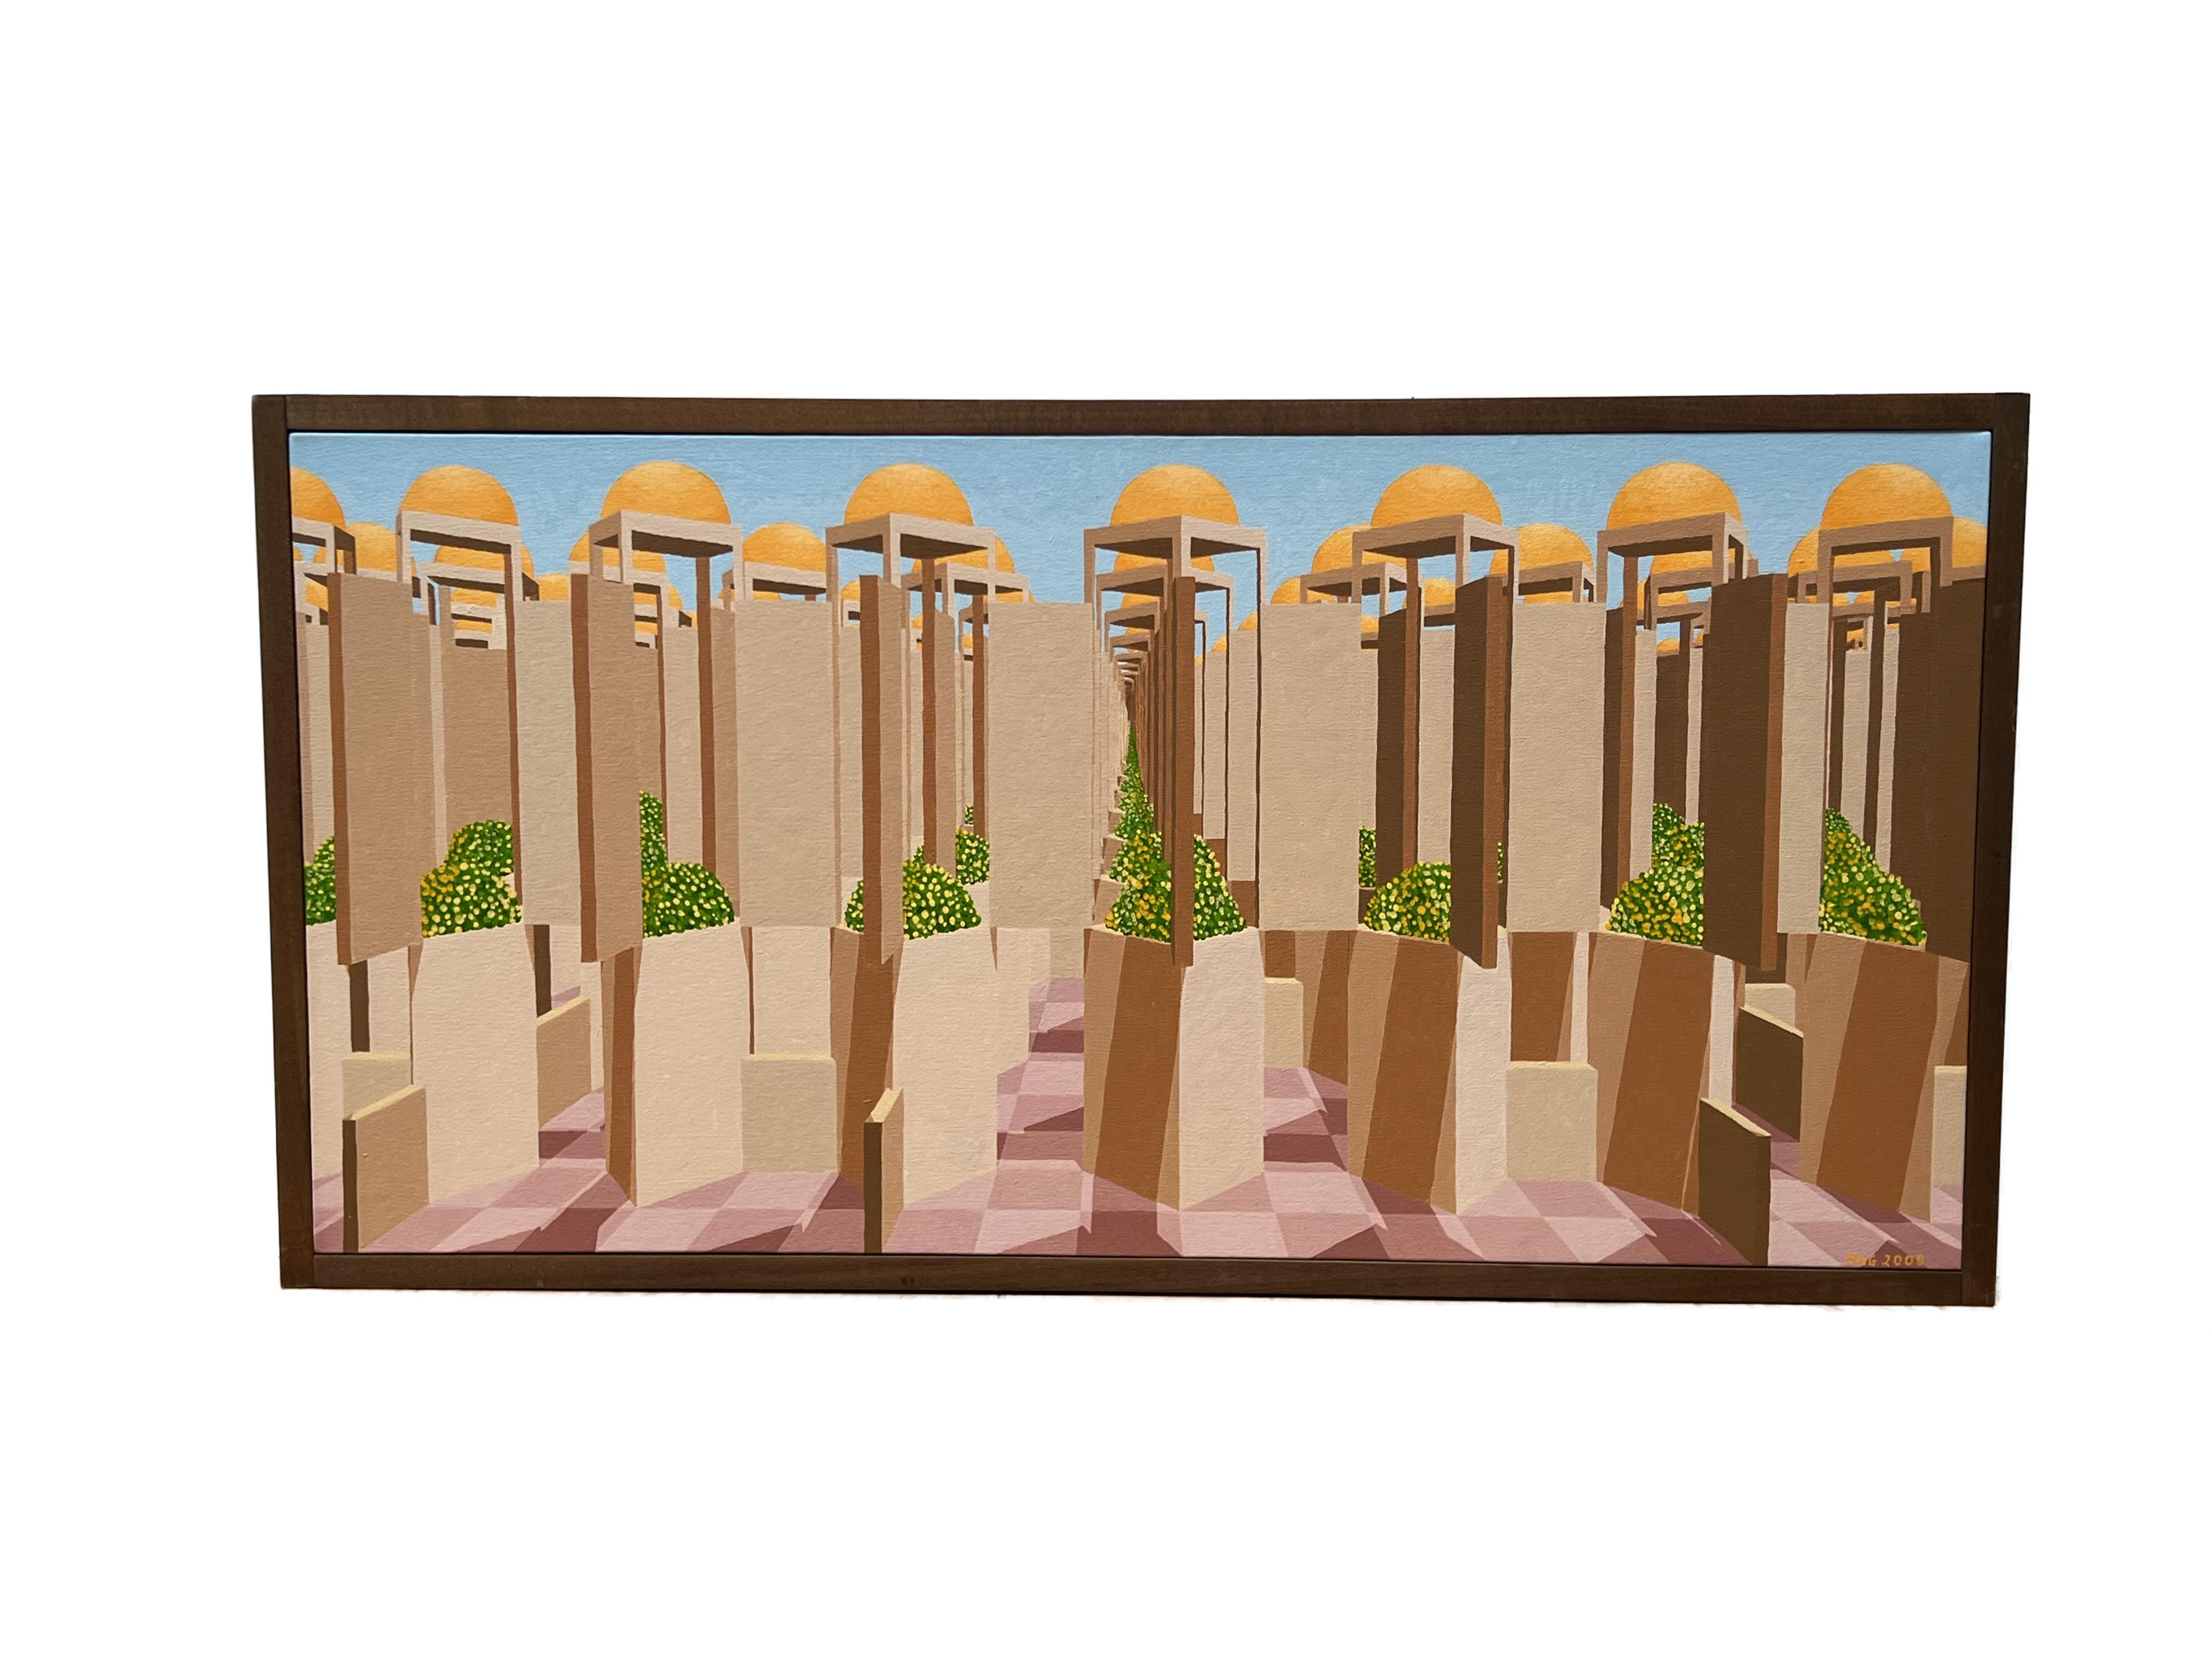 


Architectural Landscape signed BHG, 2008.
Acrylic on canvas in solid walnut frame

This striking, dream-like painting demonstrates draftsman-level technical skills; while capturing an intricate labyrinth of light and shadow.  The artist's